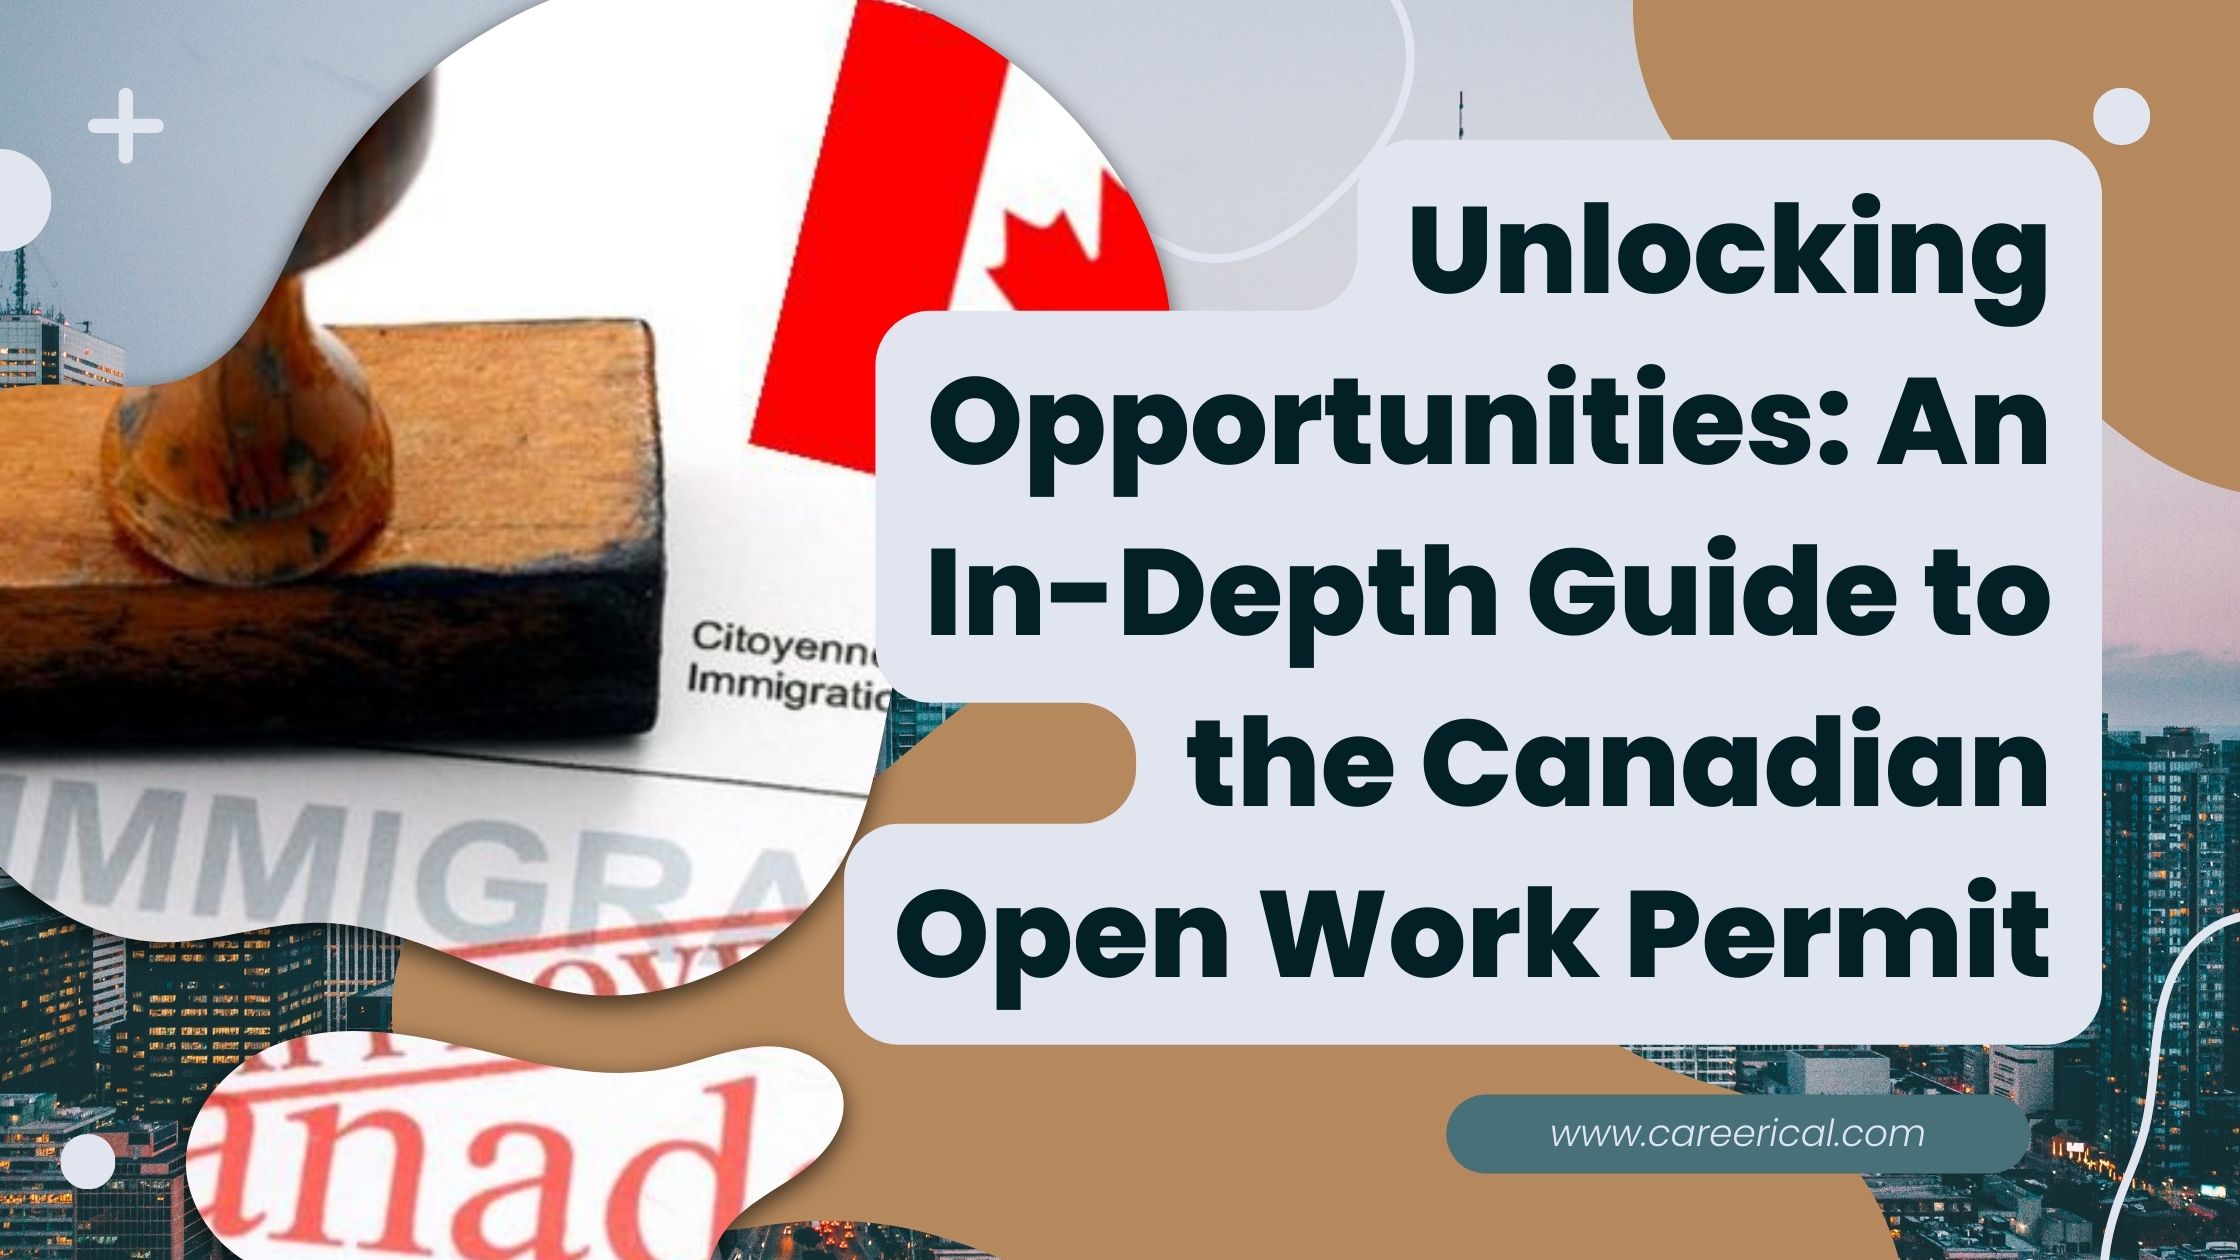 Unlocking Opportunities An In-Depth Guide to the Canadian Open Work Permit